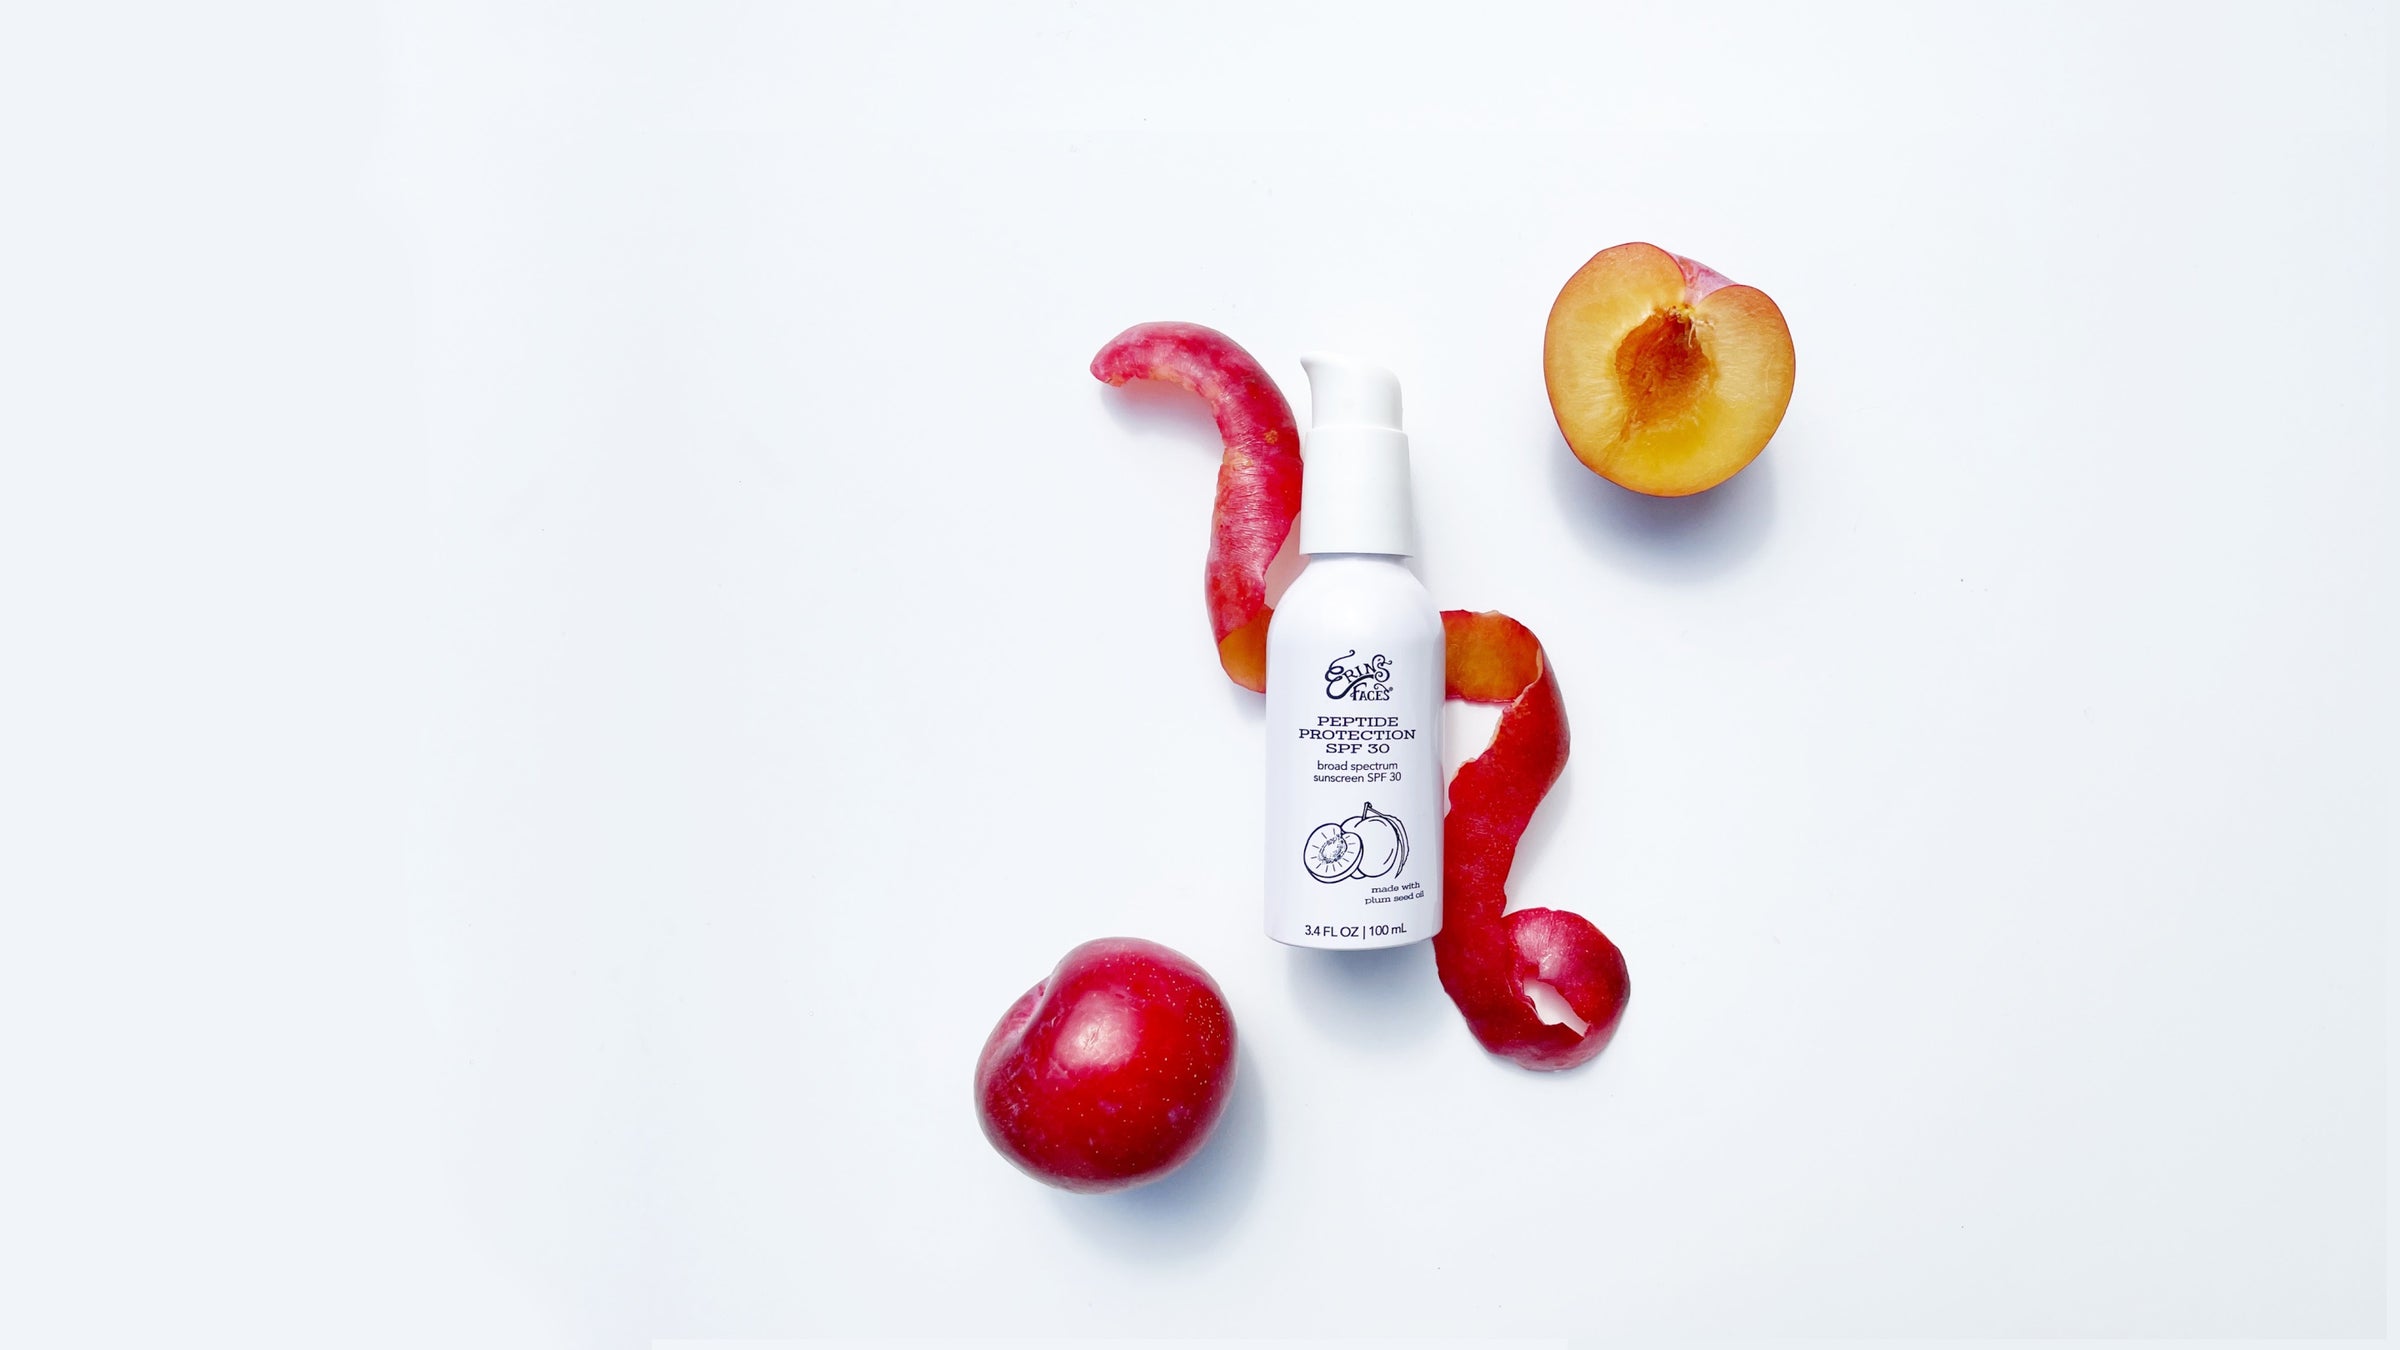 WHITE SPF BOTTLE ON WHITE BACKGROUND WITH RED PLUMS